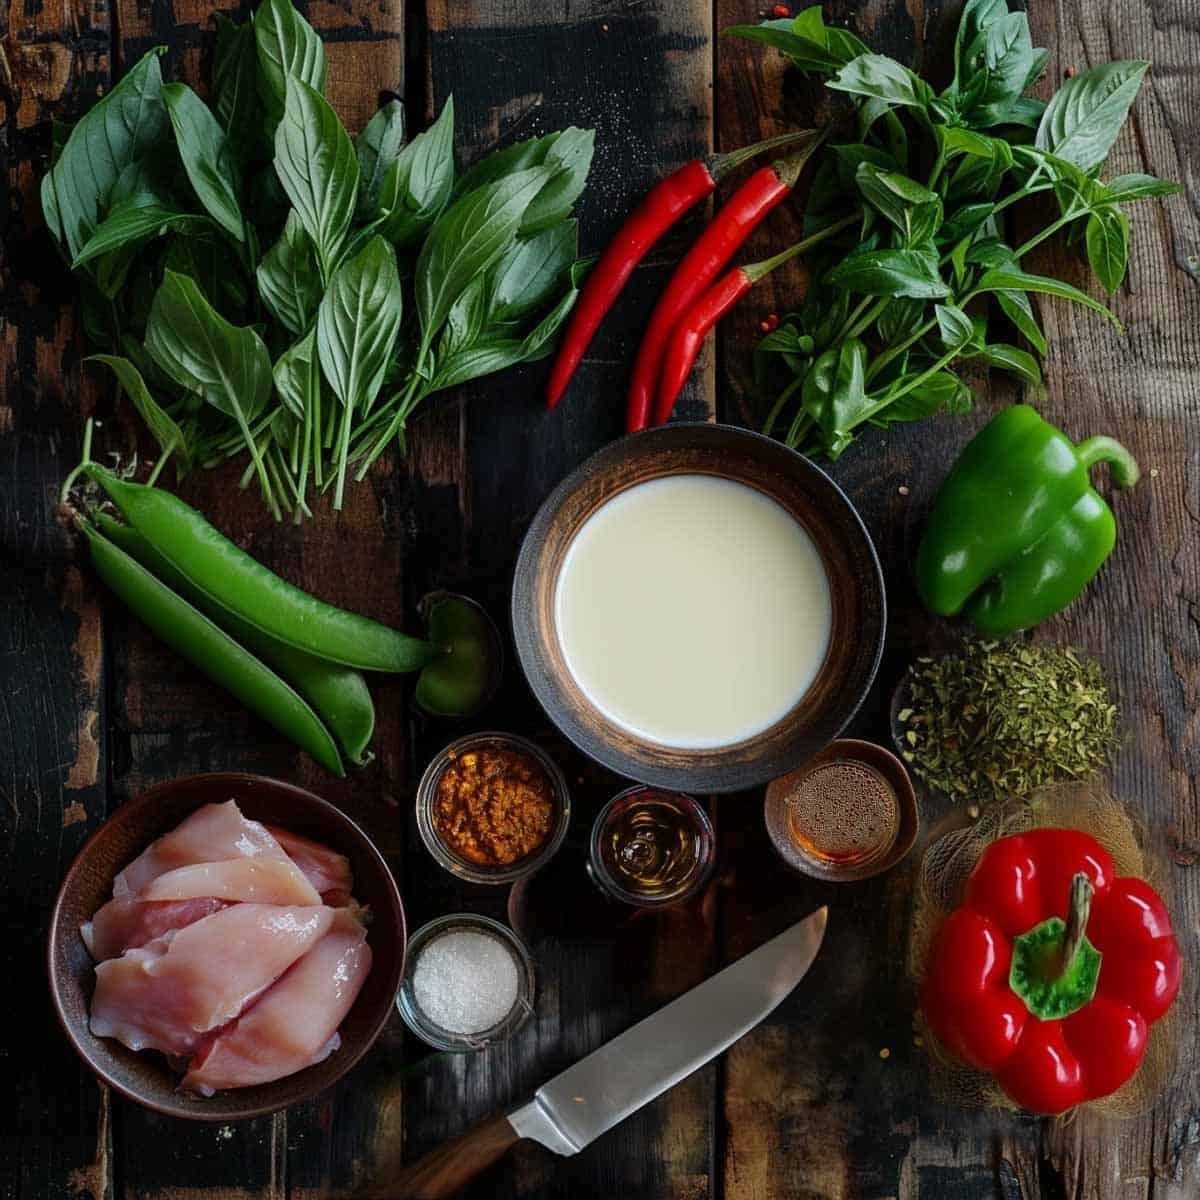 Ingredients to make Panang Curry displayed on a rustic wooden table, including red curry paste, coconut milk, sliced chicken, lime leaves, and fresh basil